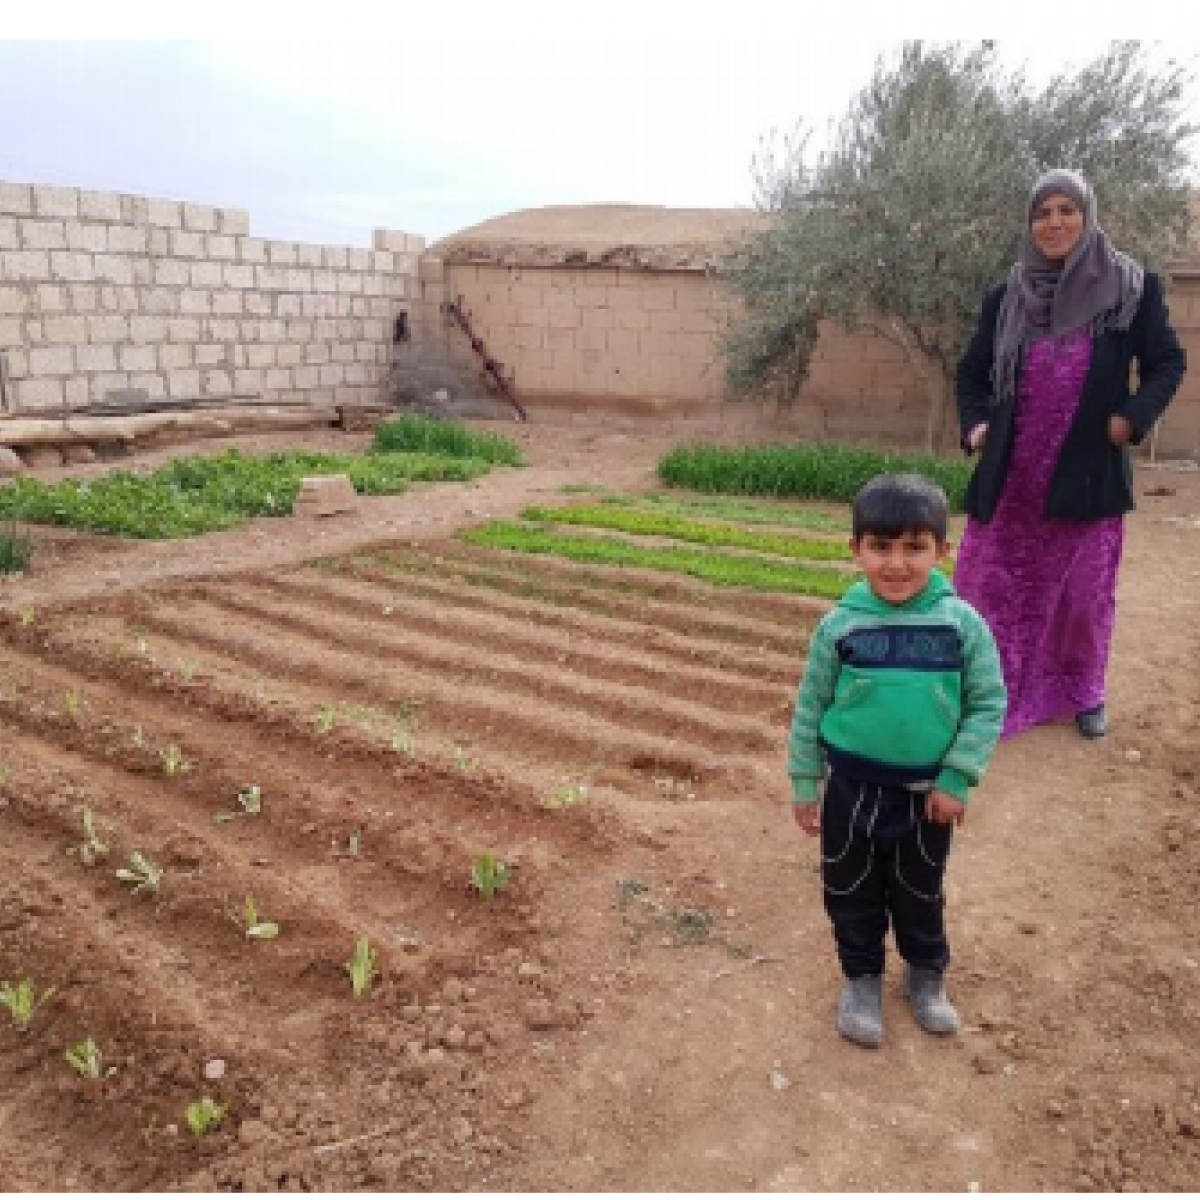 A woman and her young son stand alongside a small home vegetable garden.